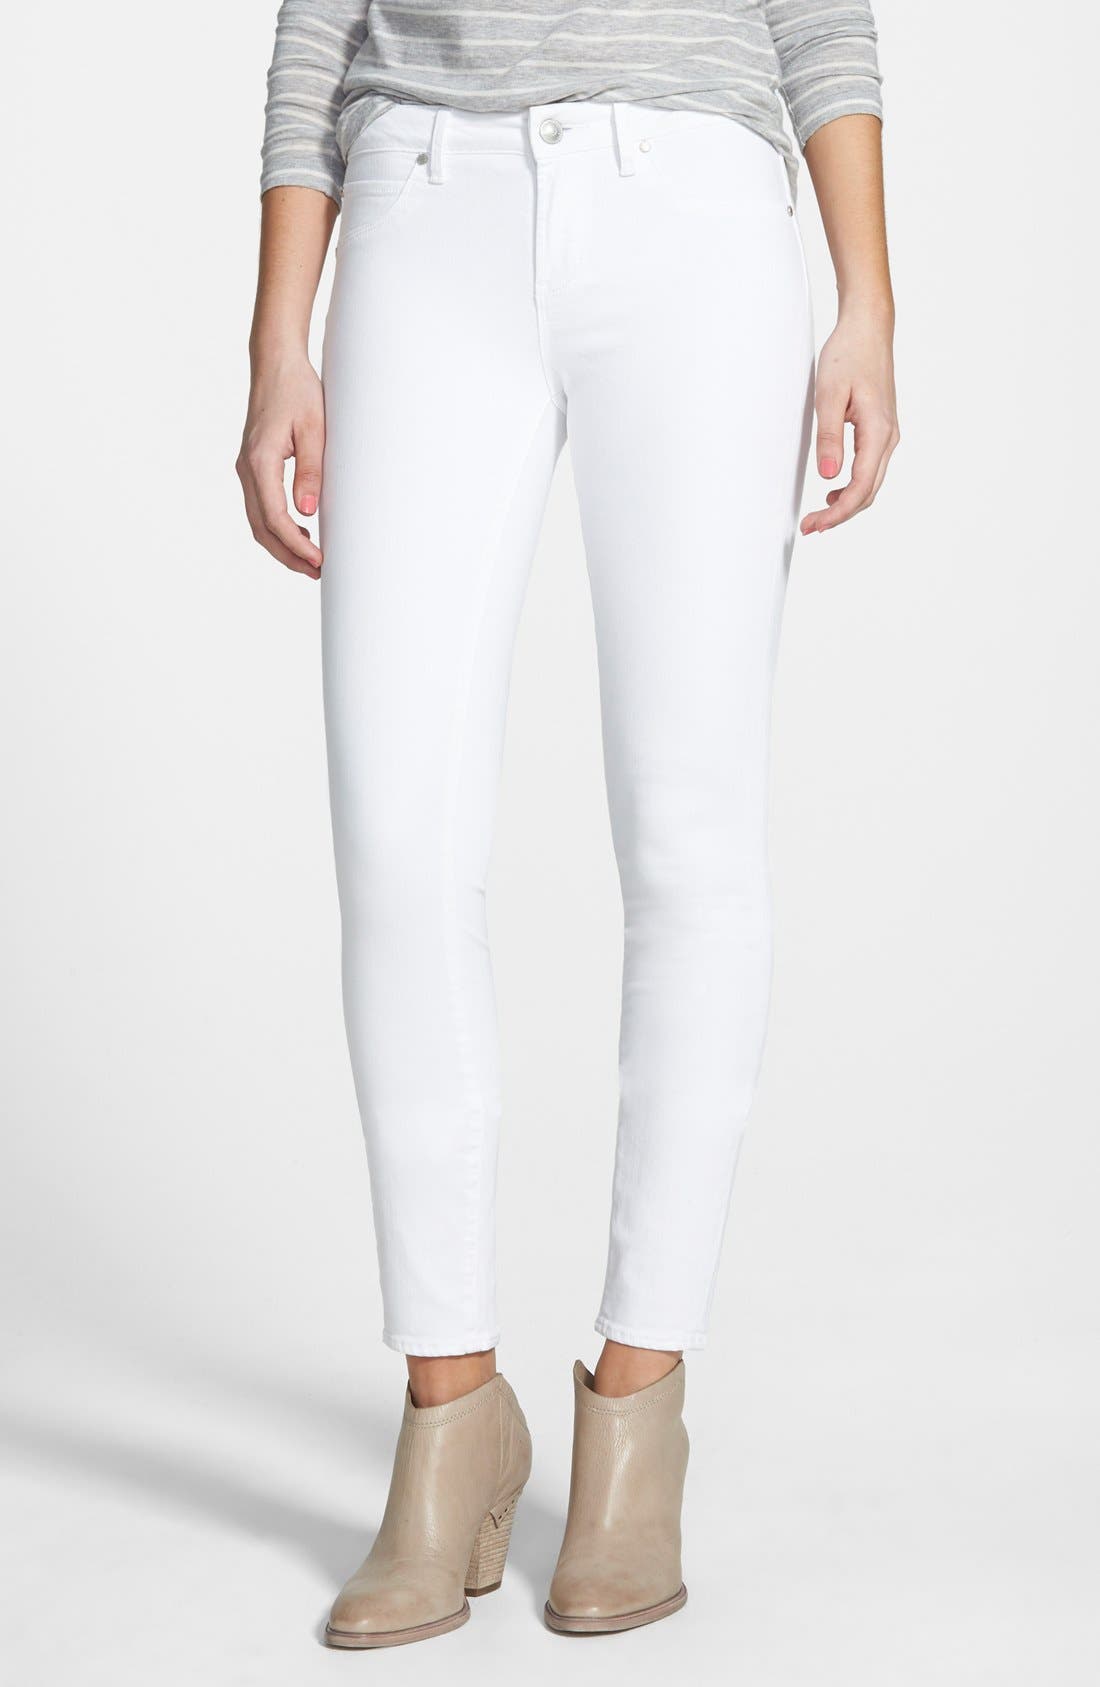 articles of society white skinny jeans